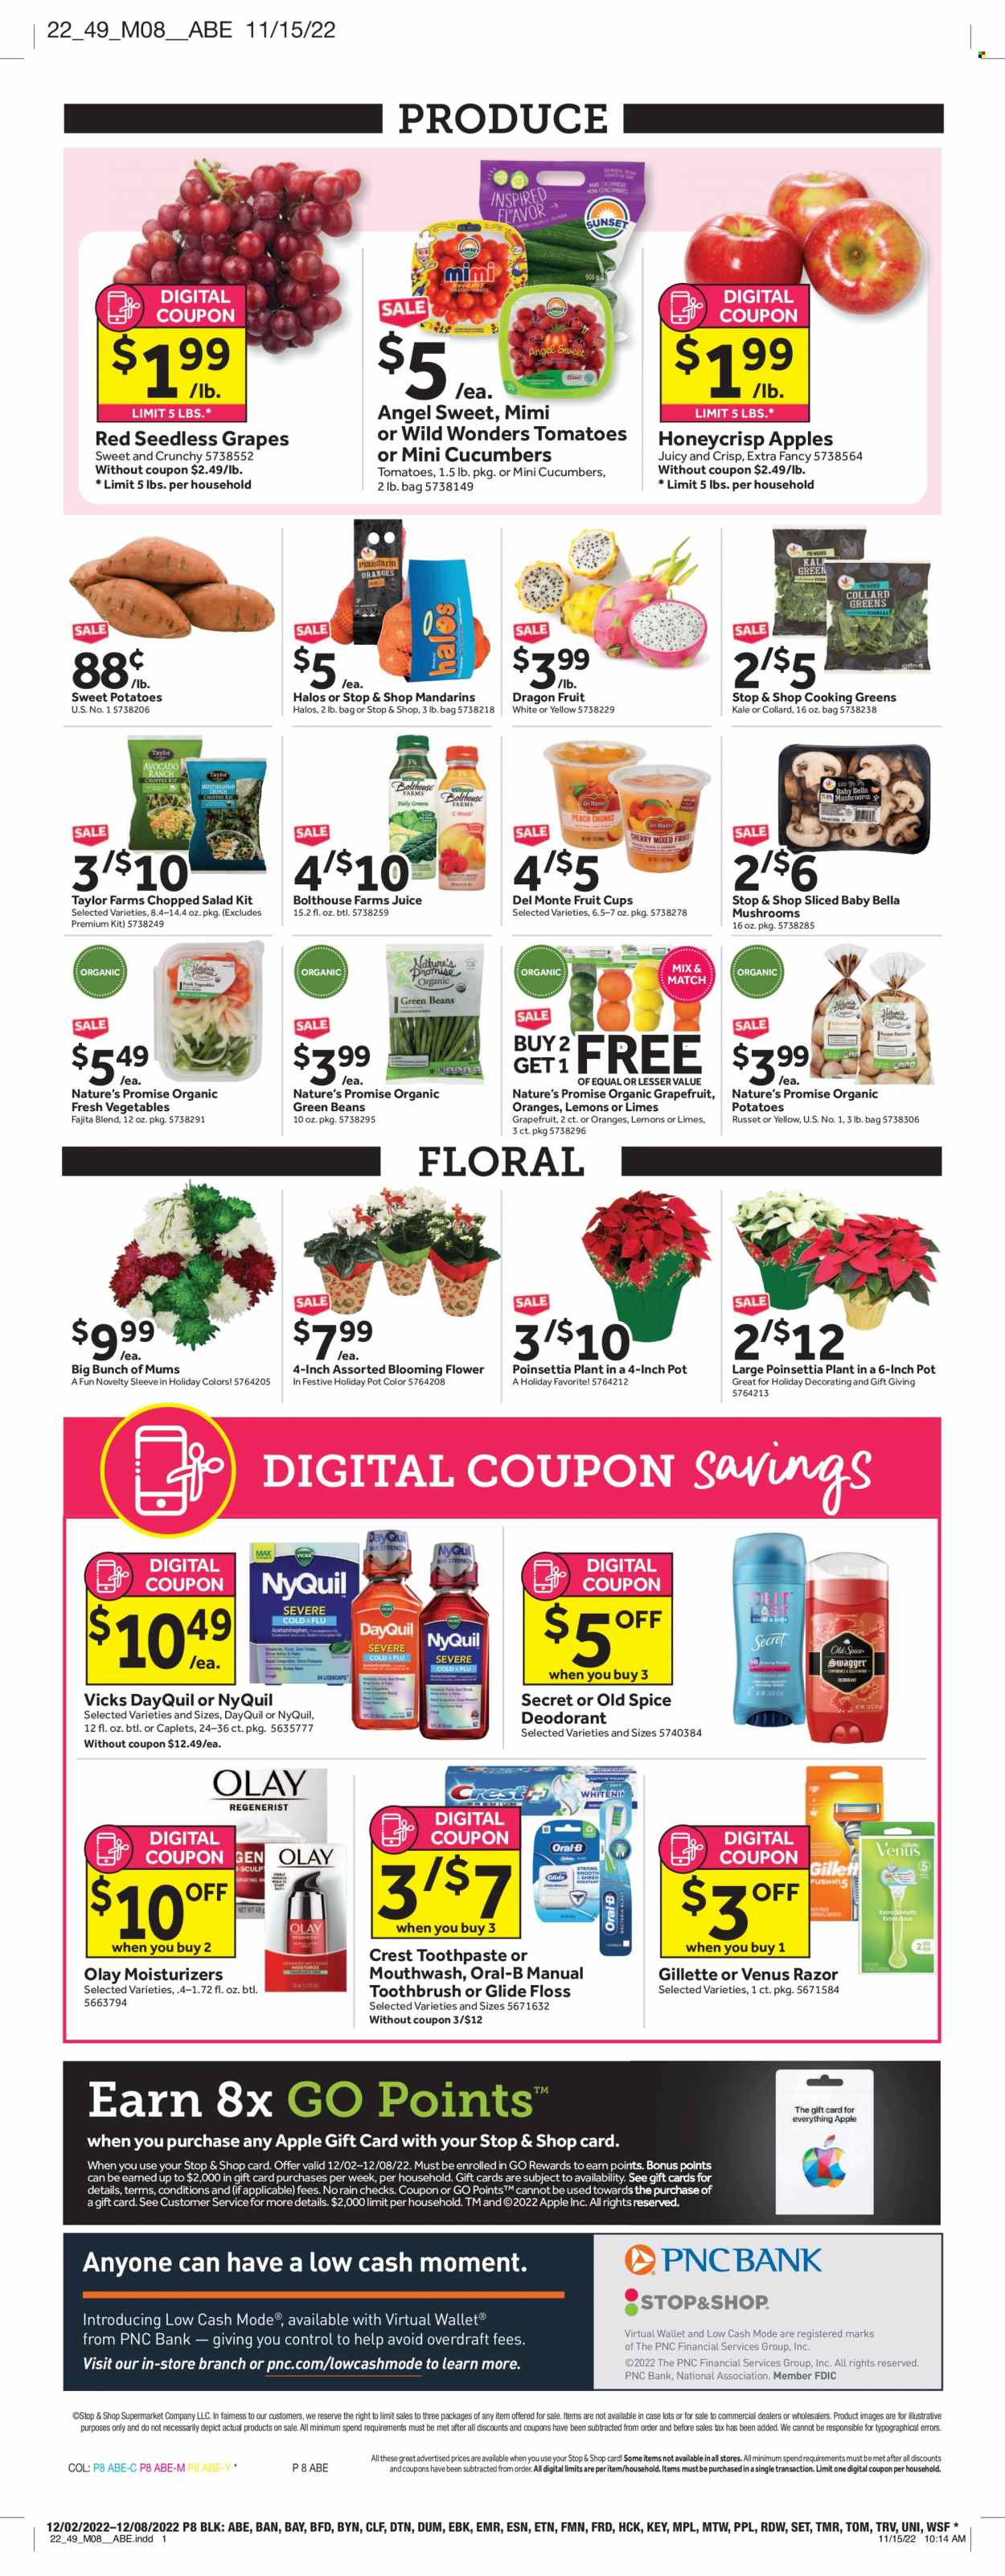 thumbnail - Stop & Shop Flyer - 12/02/2022 - 12/08/2022 - Sales products - mushrooms, Nature’s Promise, beans, collard greens, green beans, russet potatoes, sweet potato, kale, potatoes, chopped salad, apples, avocado, grapefruits, grapes, limes, mandarines, seedless grapes, oranges, fruit cup, dragon fruit, fajita mix, Del Monte, spice, juice, Old Spice, toothbrush, Oral-B, toothpaste, mouthwash, Crest, moisturizer, Olay, anti-perspirant, deodorant, Gillette, razor, Venus, Vicks, pot, poinsettia, DayQuil, Cold & Flu, NyQuil, lemons. Page 6.